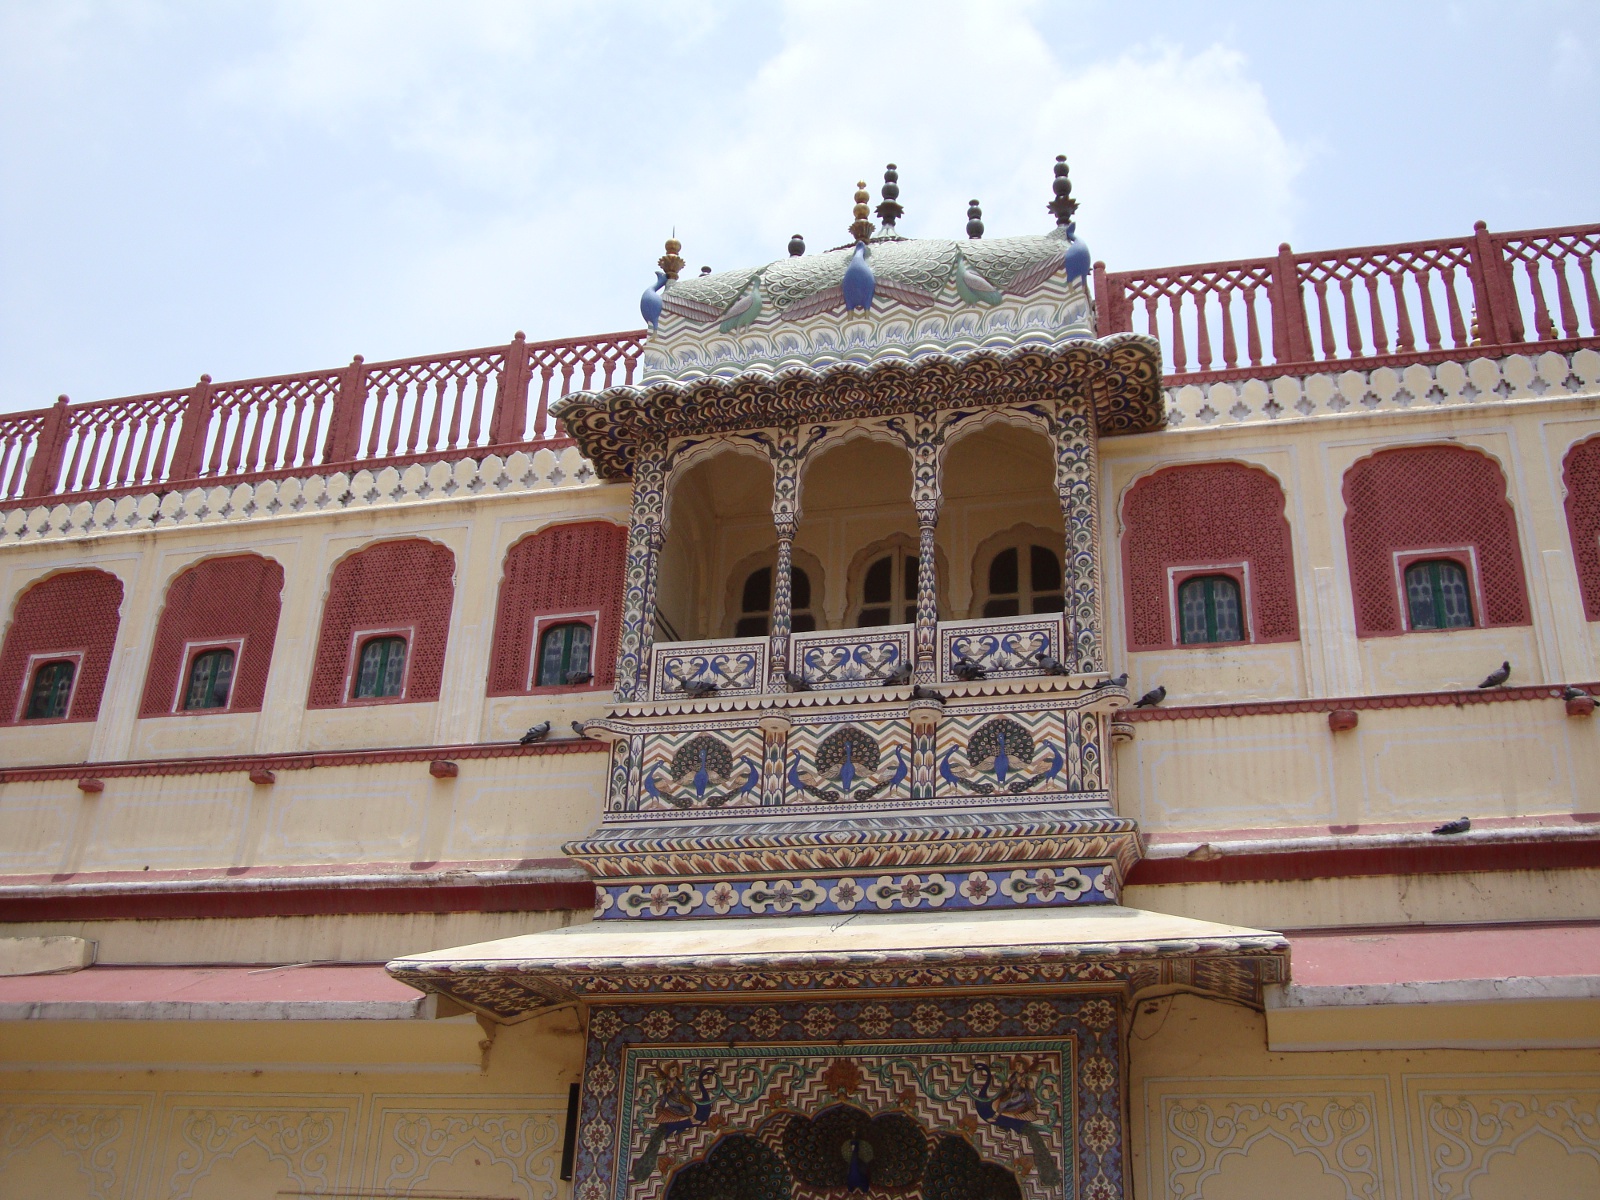 Rich ornamentation in the Peacock Gate of the City Palace in Jaipur.